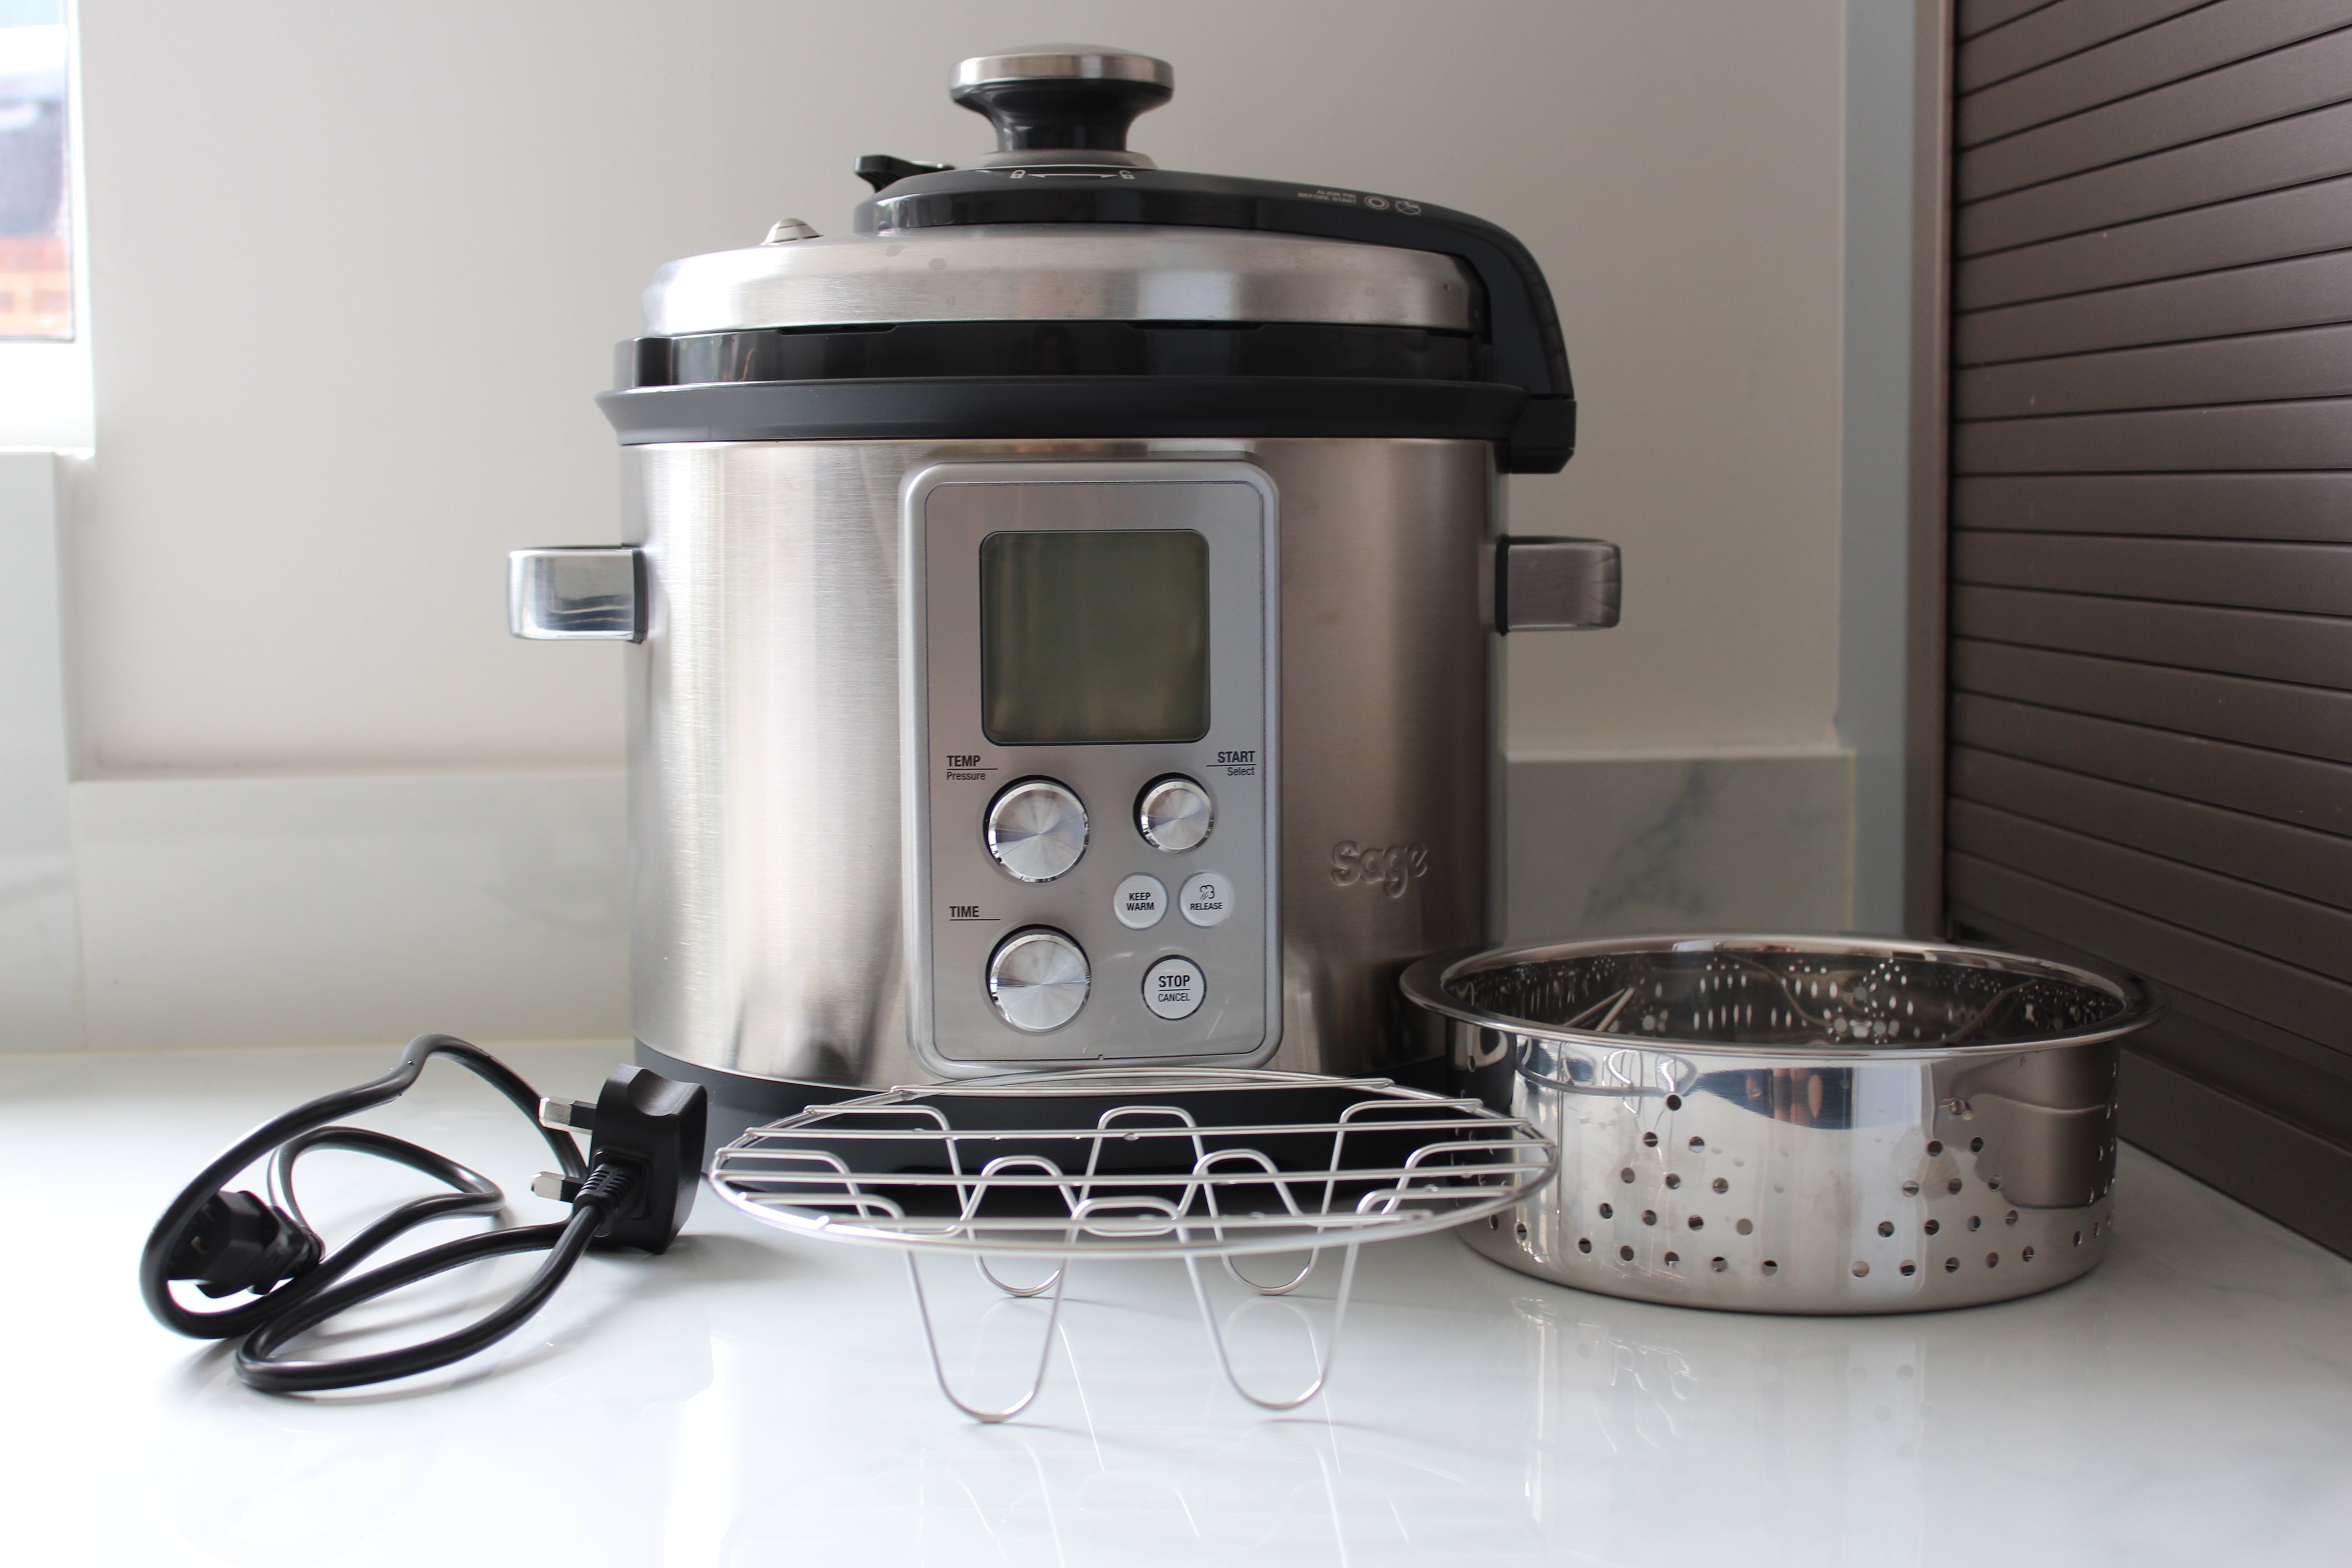 Sage Fast Slow Pro pressure cooker with accessories.